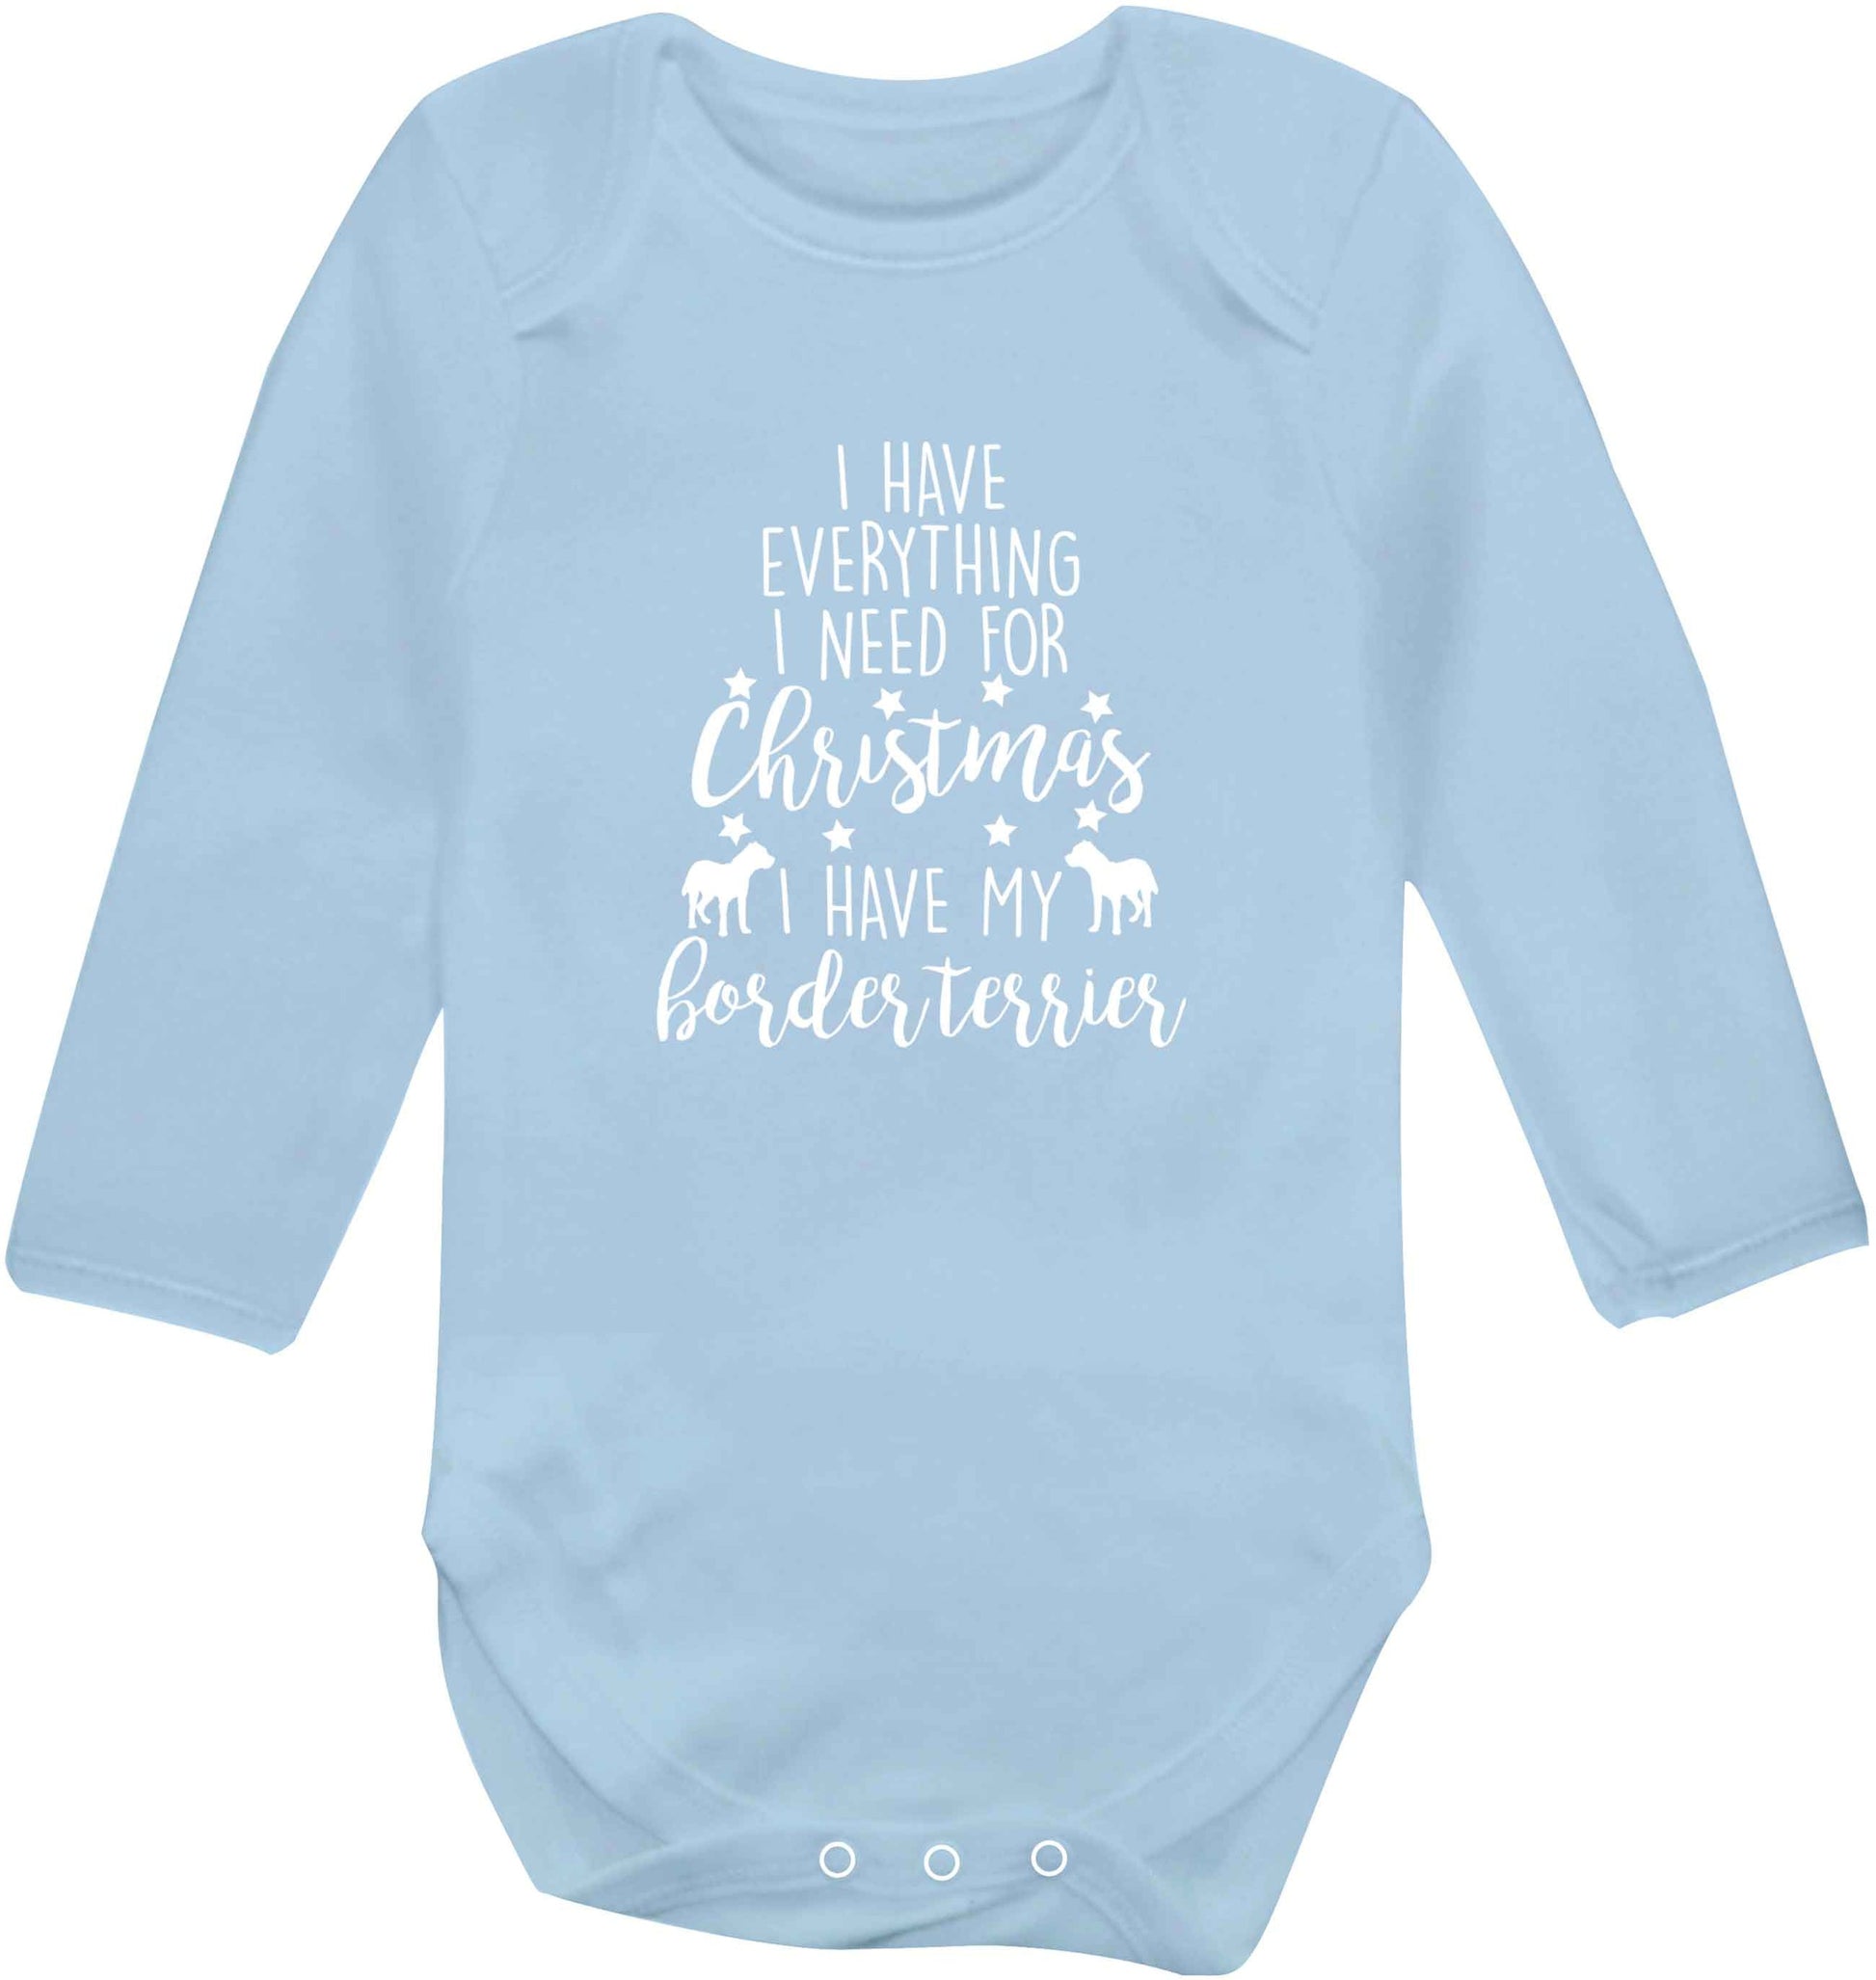 I have everything I need for Christmas I have my border terrier baby vest long sleeved pale blue 6-12 months